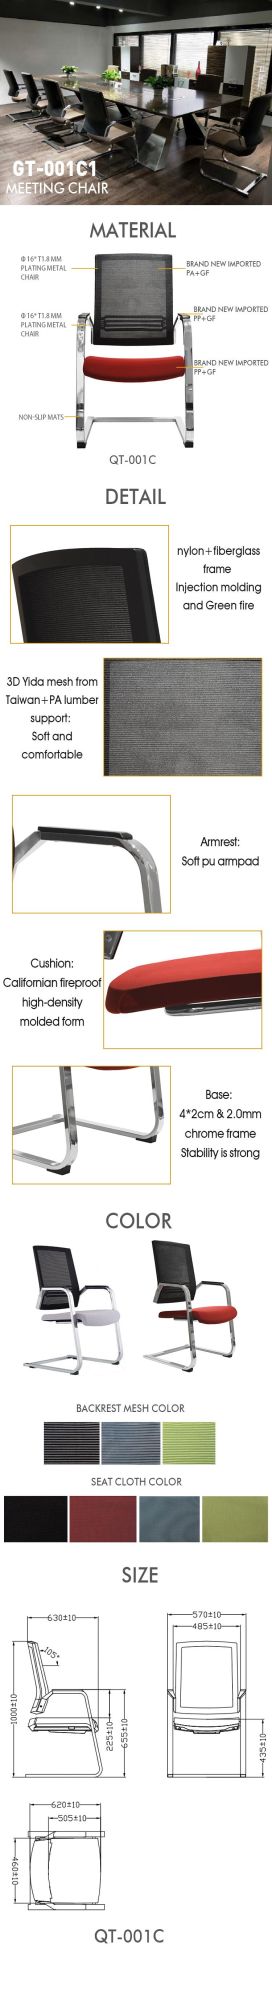 74*59*63 Fixed Huy Stand Export Packing Home Office Conference Chair